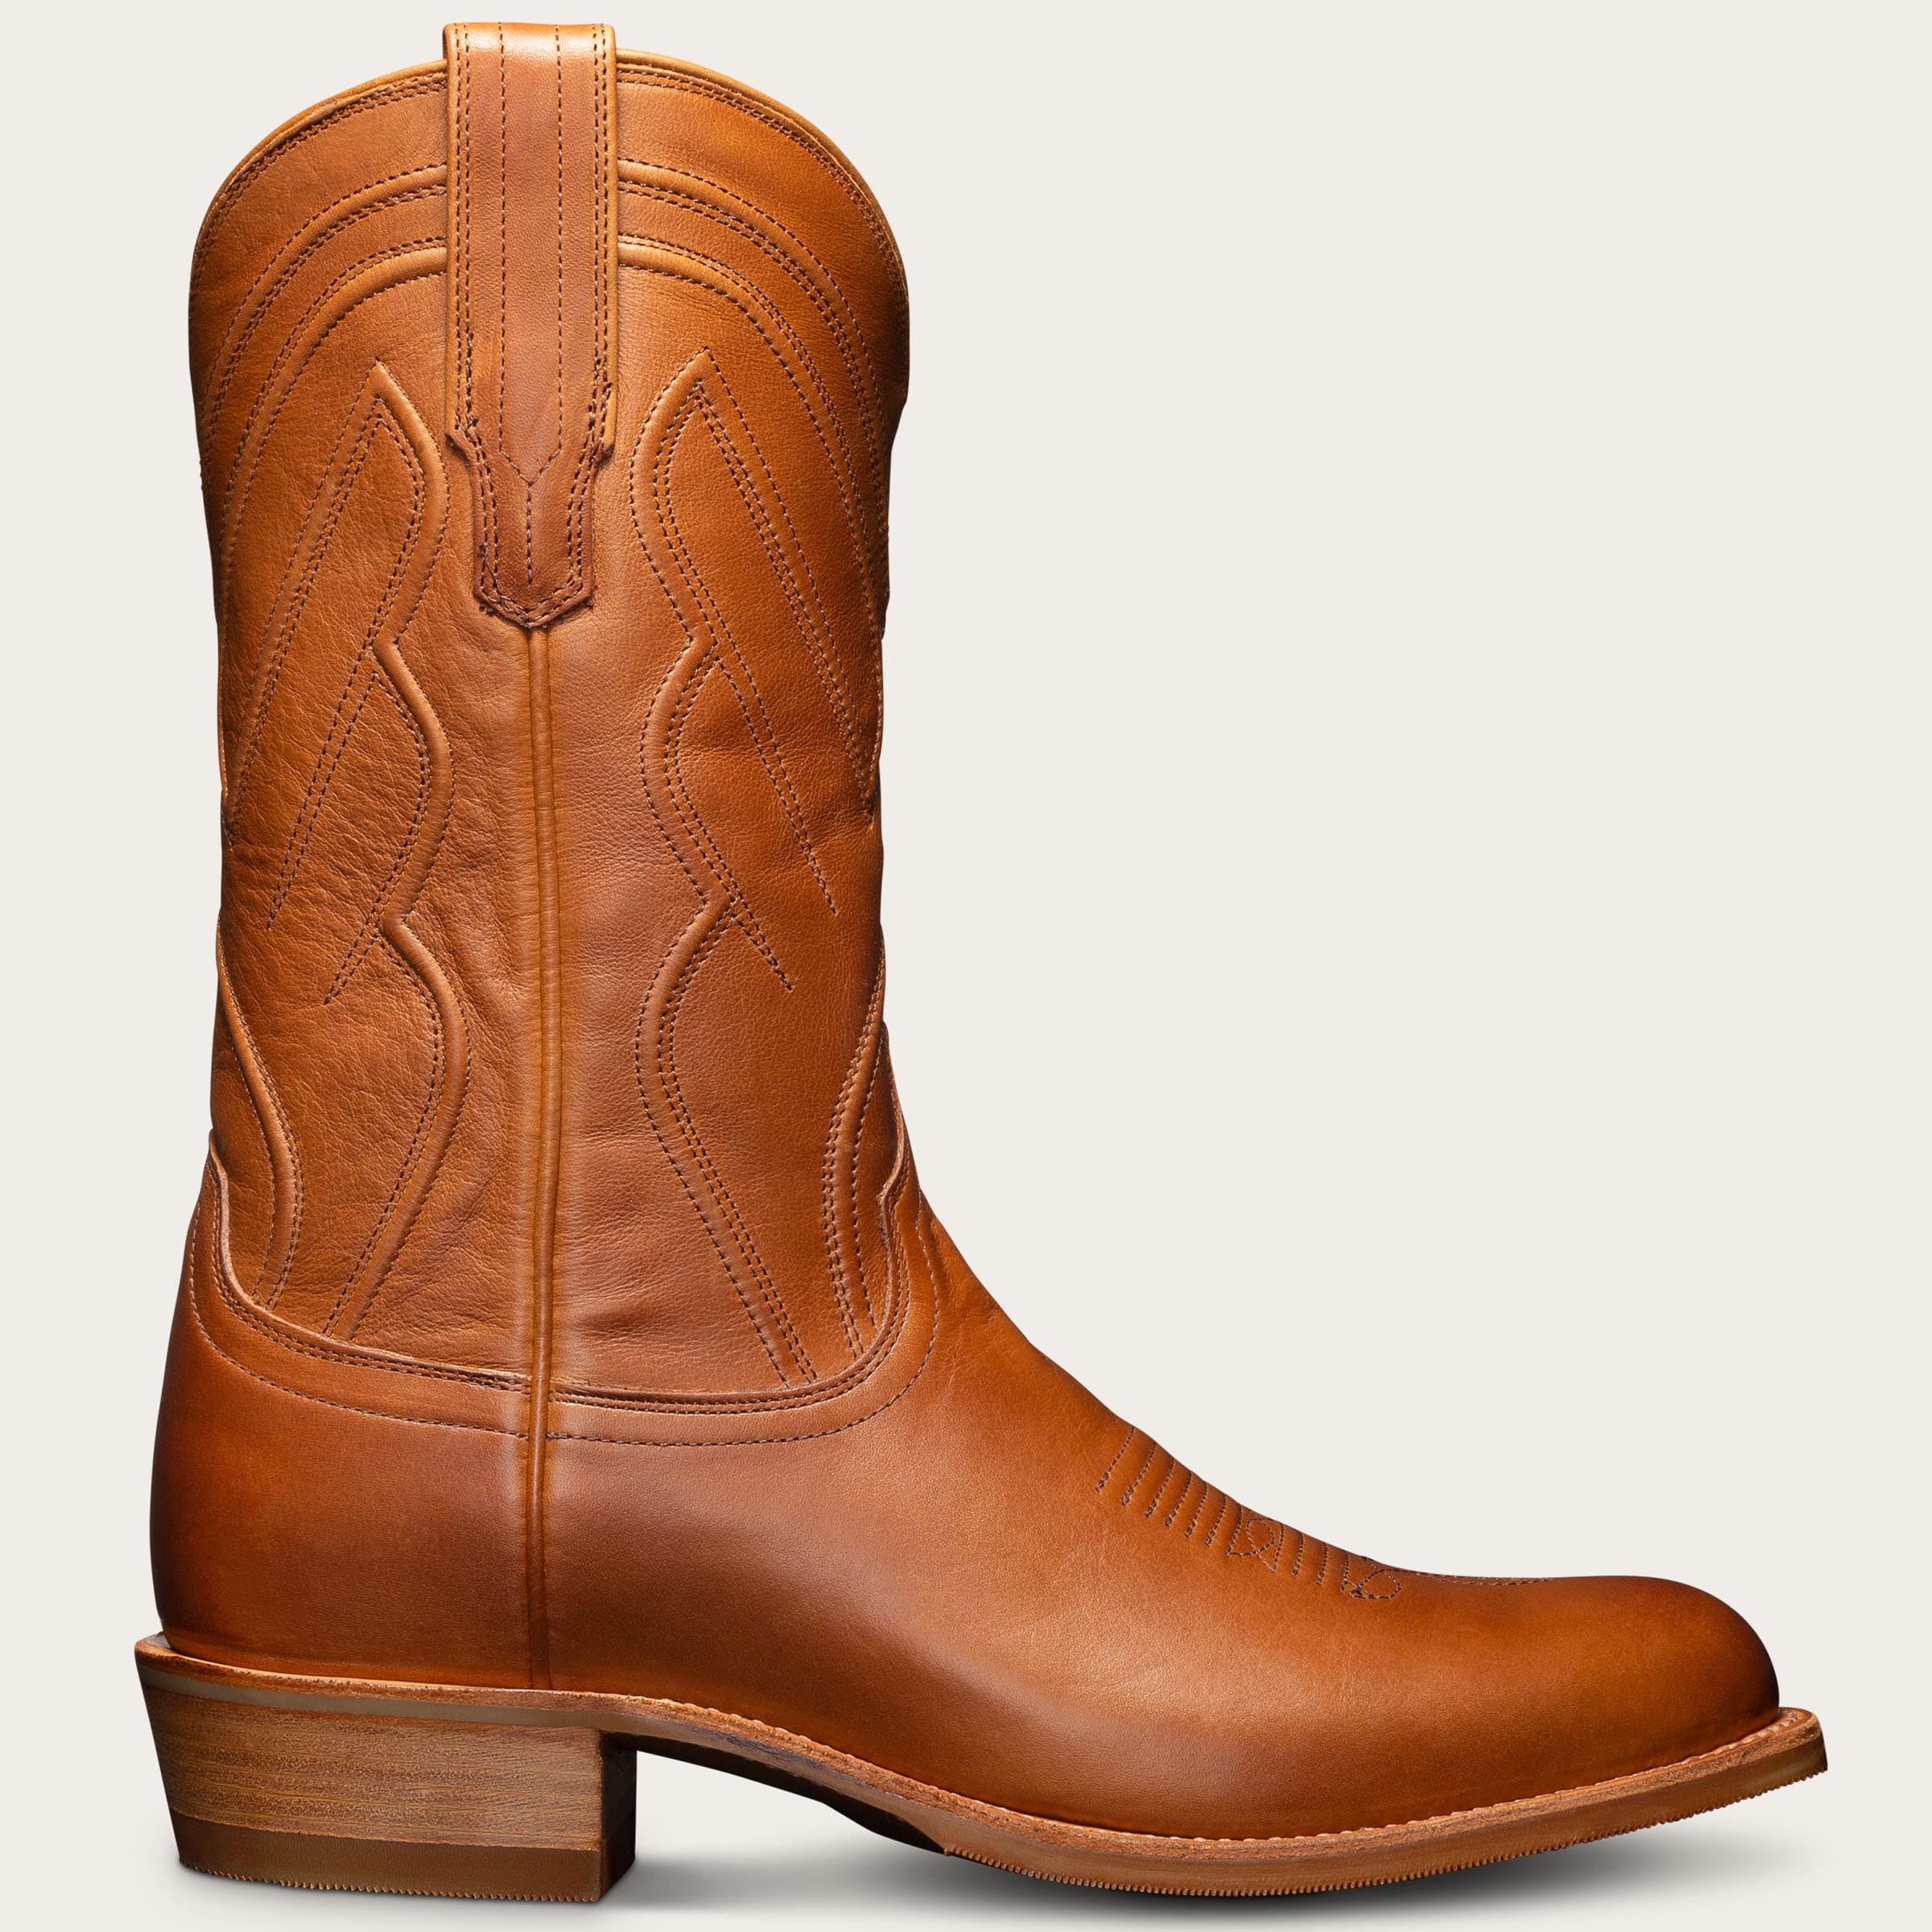 Water-Resistant Rubber Sole Boot - Mens Bovine Cowboy Boot | The Jason